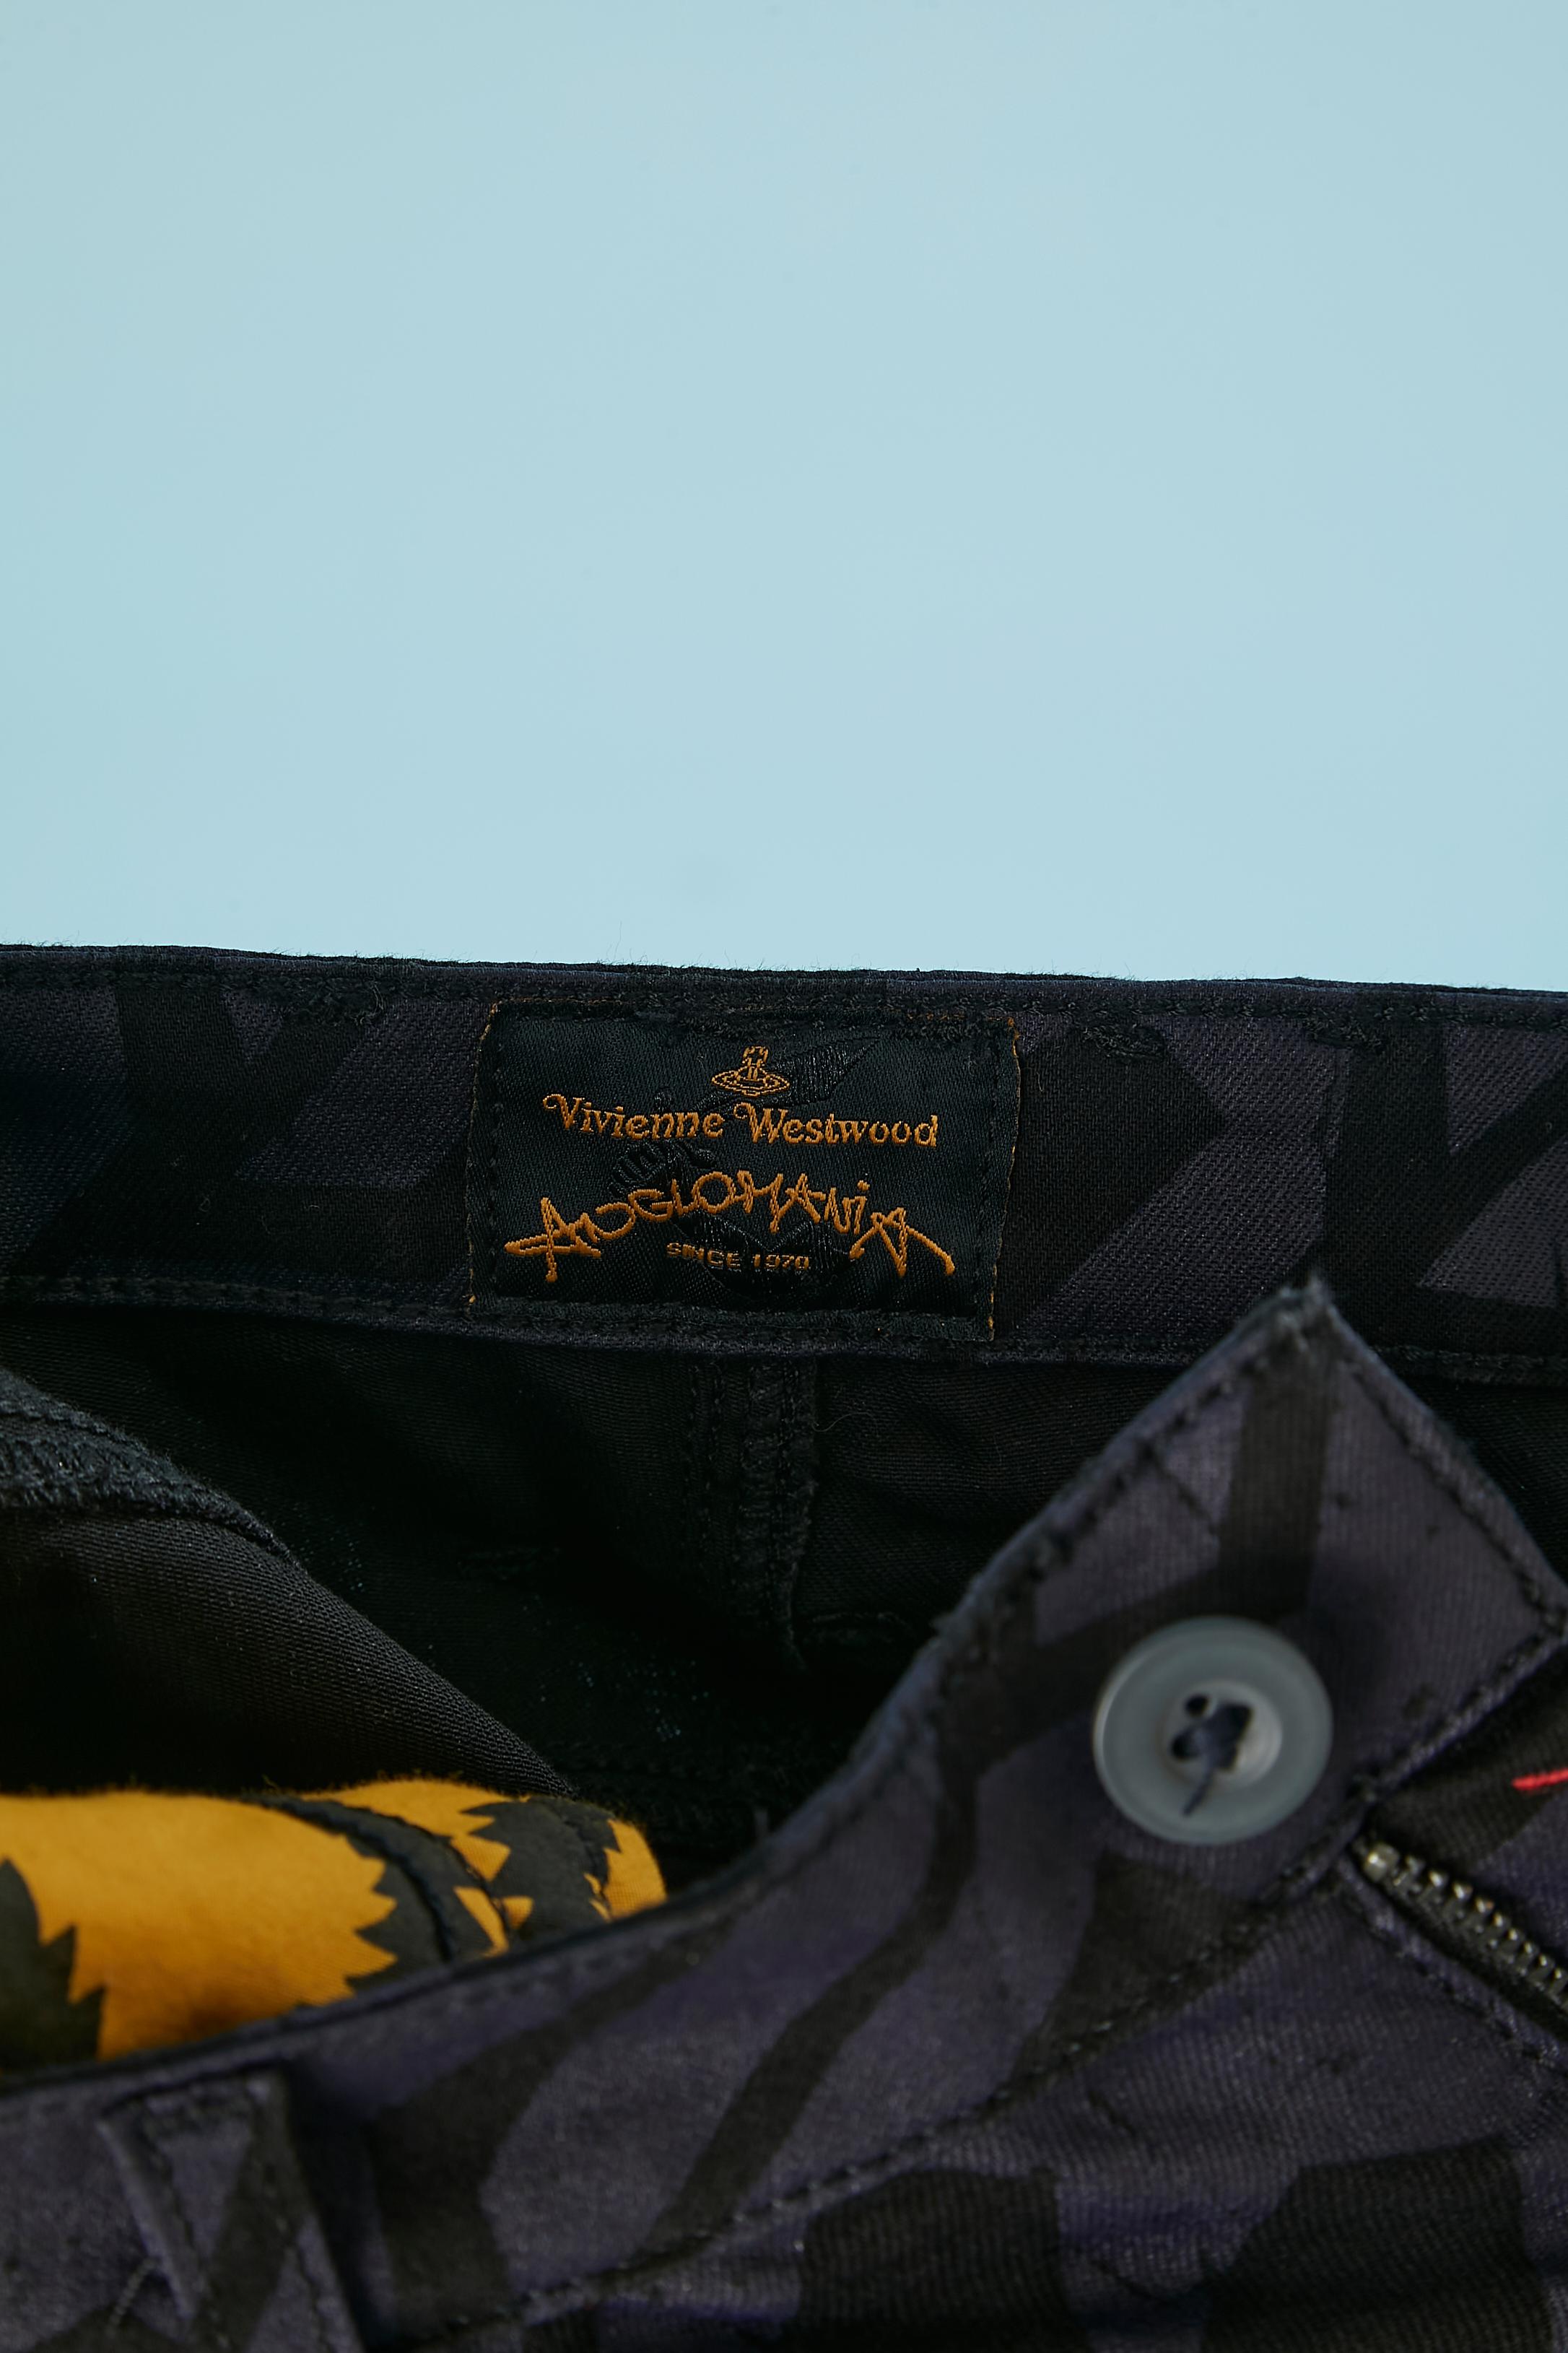 Black jean with purple printed stars on  Anglomania by Vivienne Westwood For Sale 2